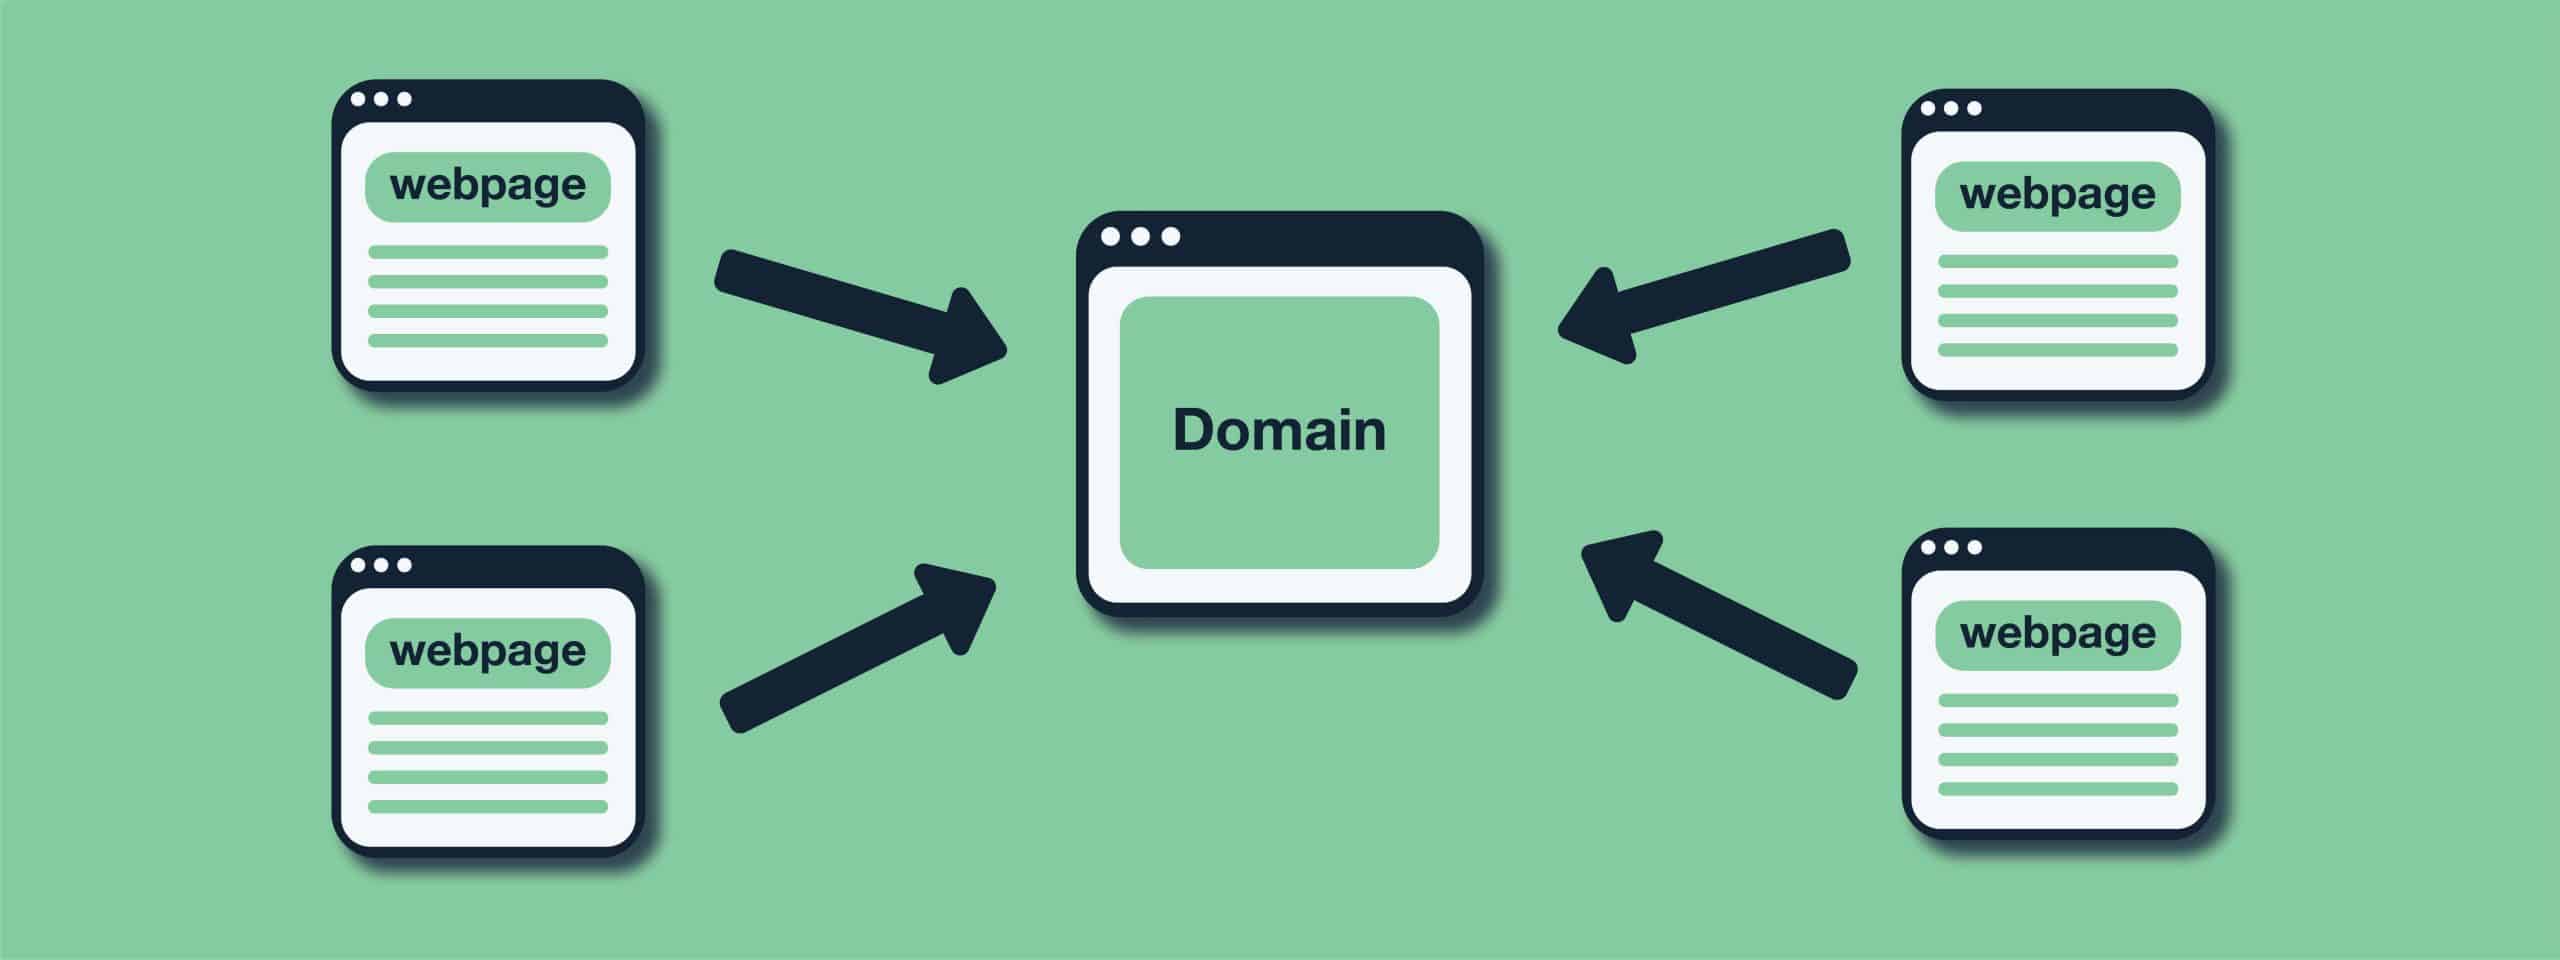 How to use Nginx to fulfill 301 redirect to root domain of https